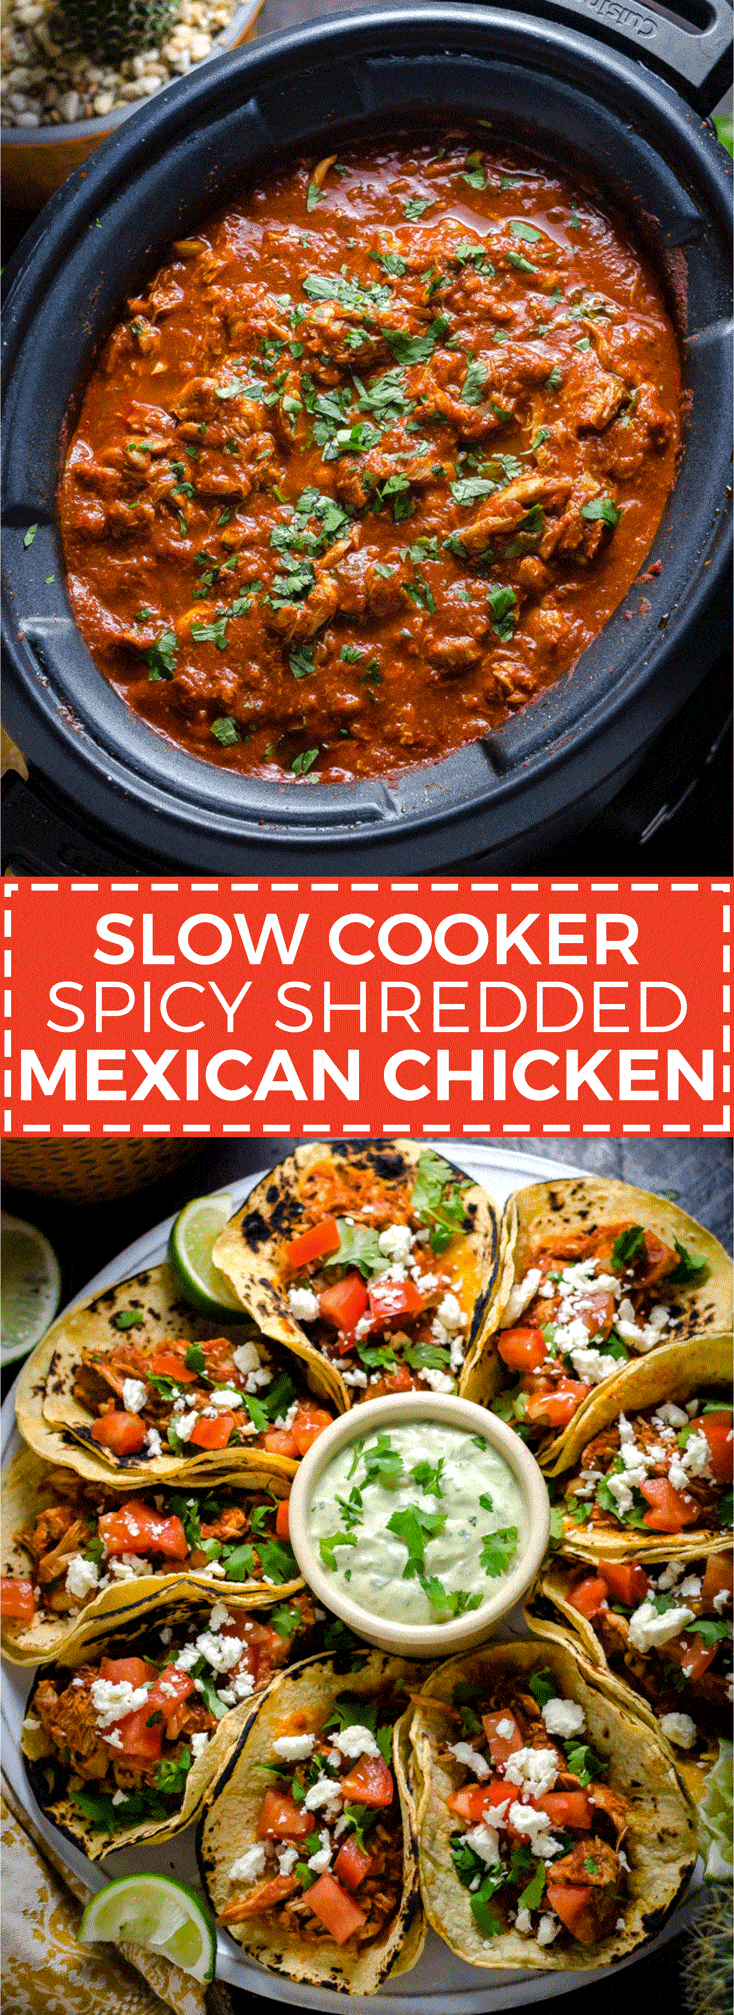 Slow Cooker Spicy Shredded Mexican Chicken. Almost as easy to make as it is delicious. Great for tacos, enchiladas, burritos, and more! | hostthetoast.com